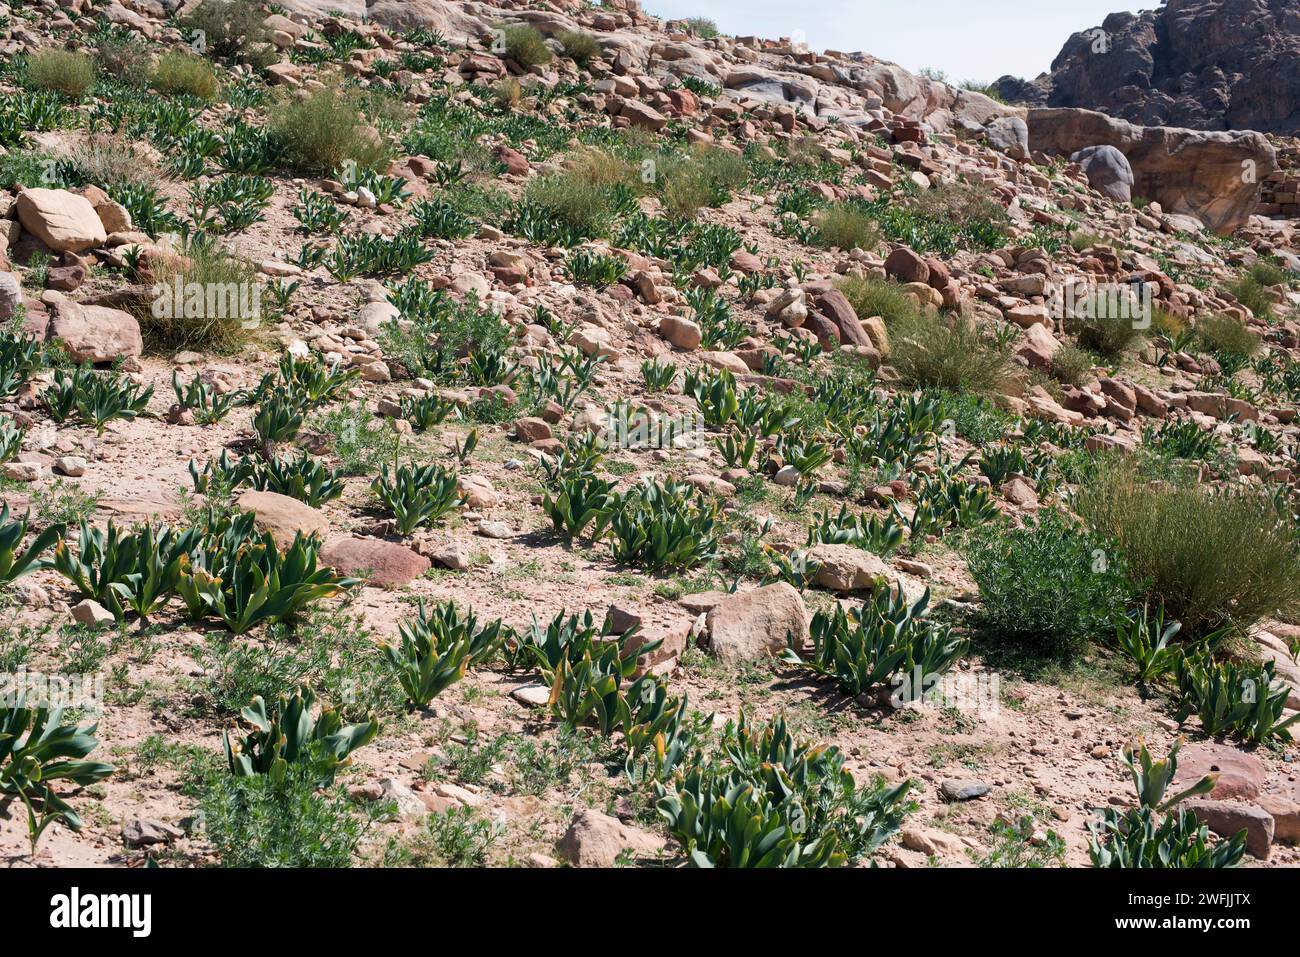 Sea squill (Drimia maritima or Urginea maritima) is a perennial herb native to Mediterranean Basin coasts. It is poisonous and medicinal used since an Stock Photo